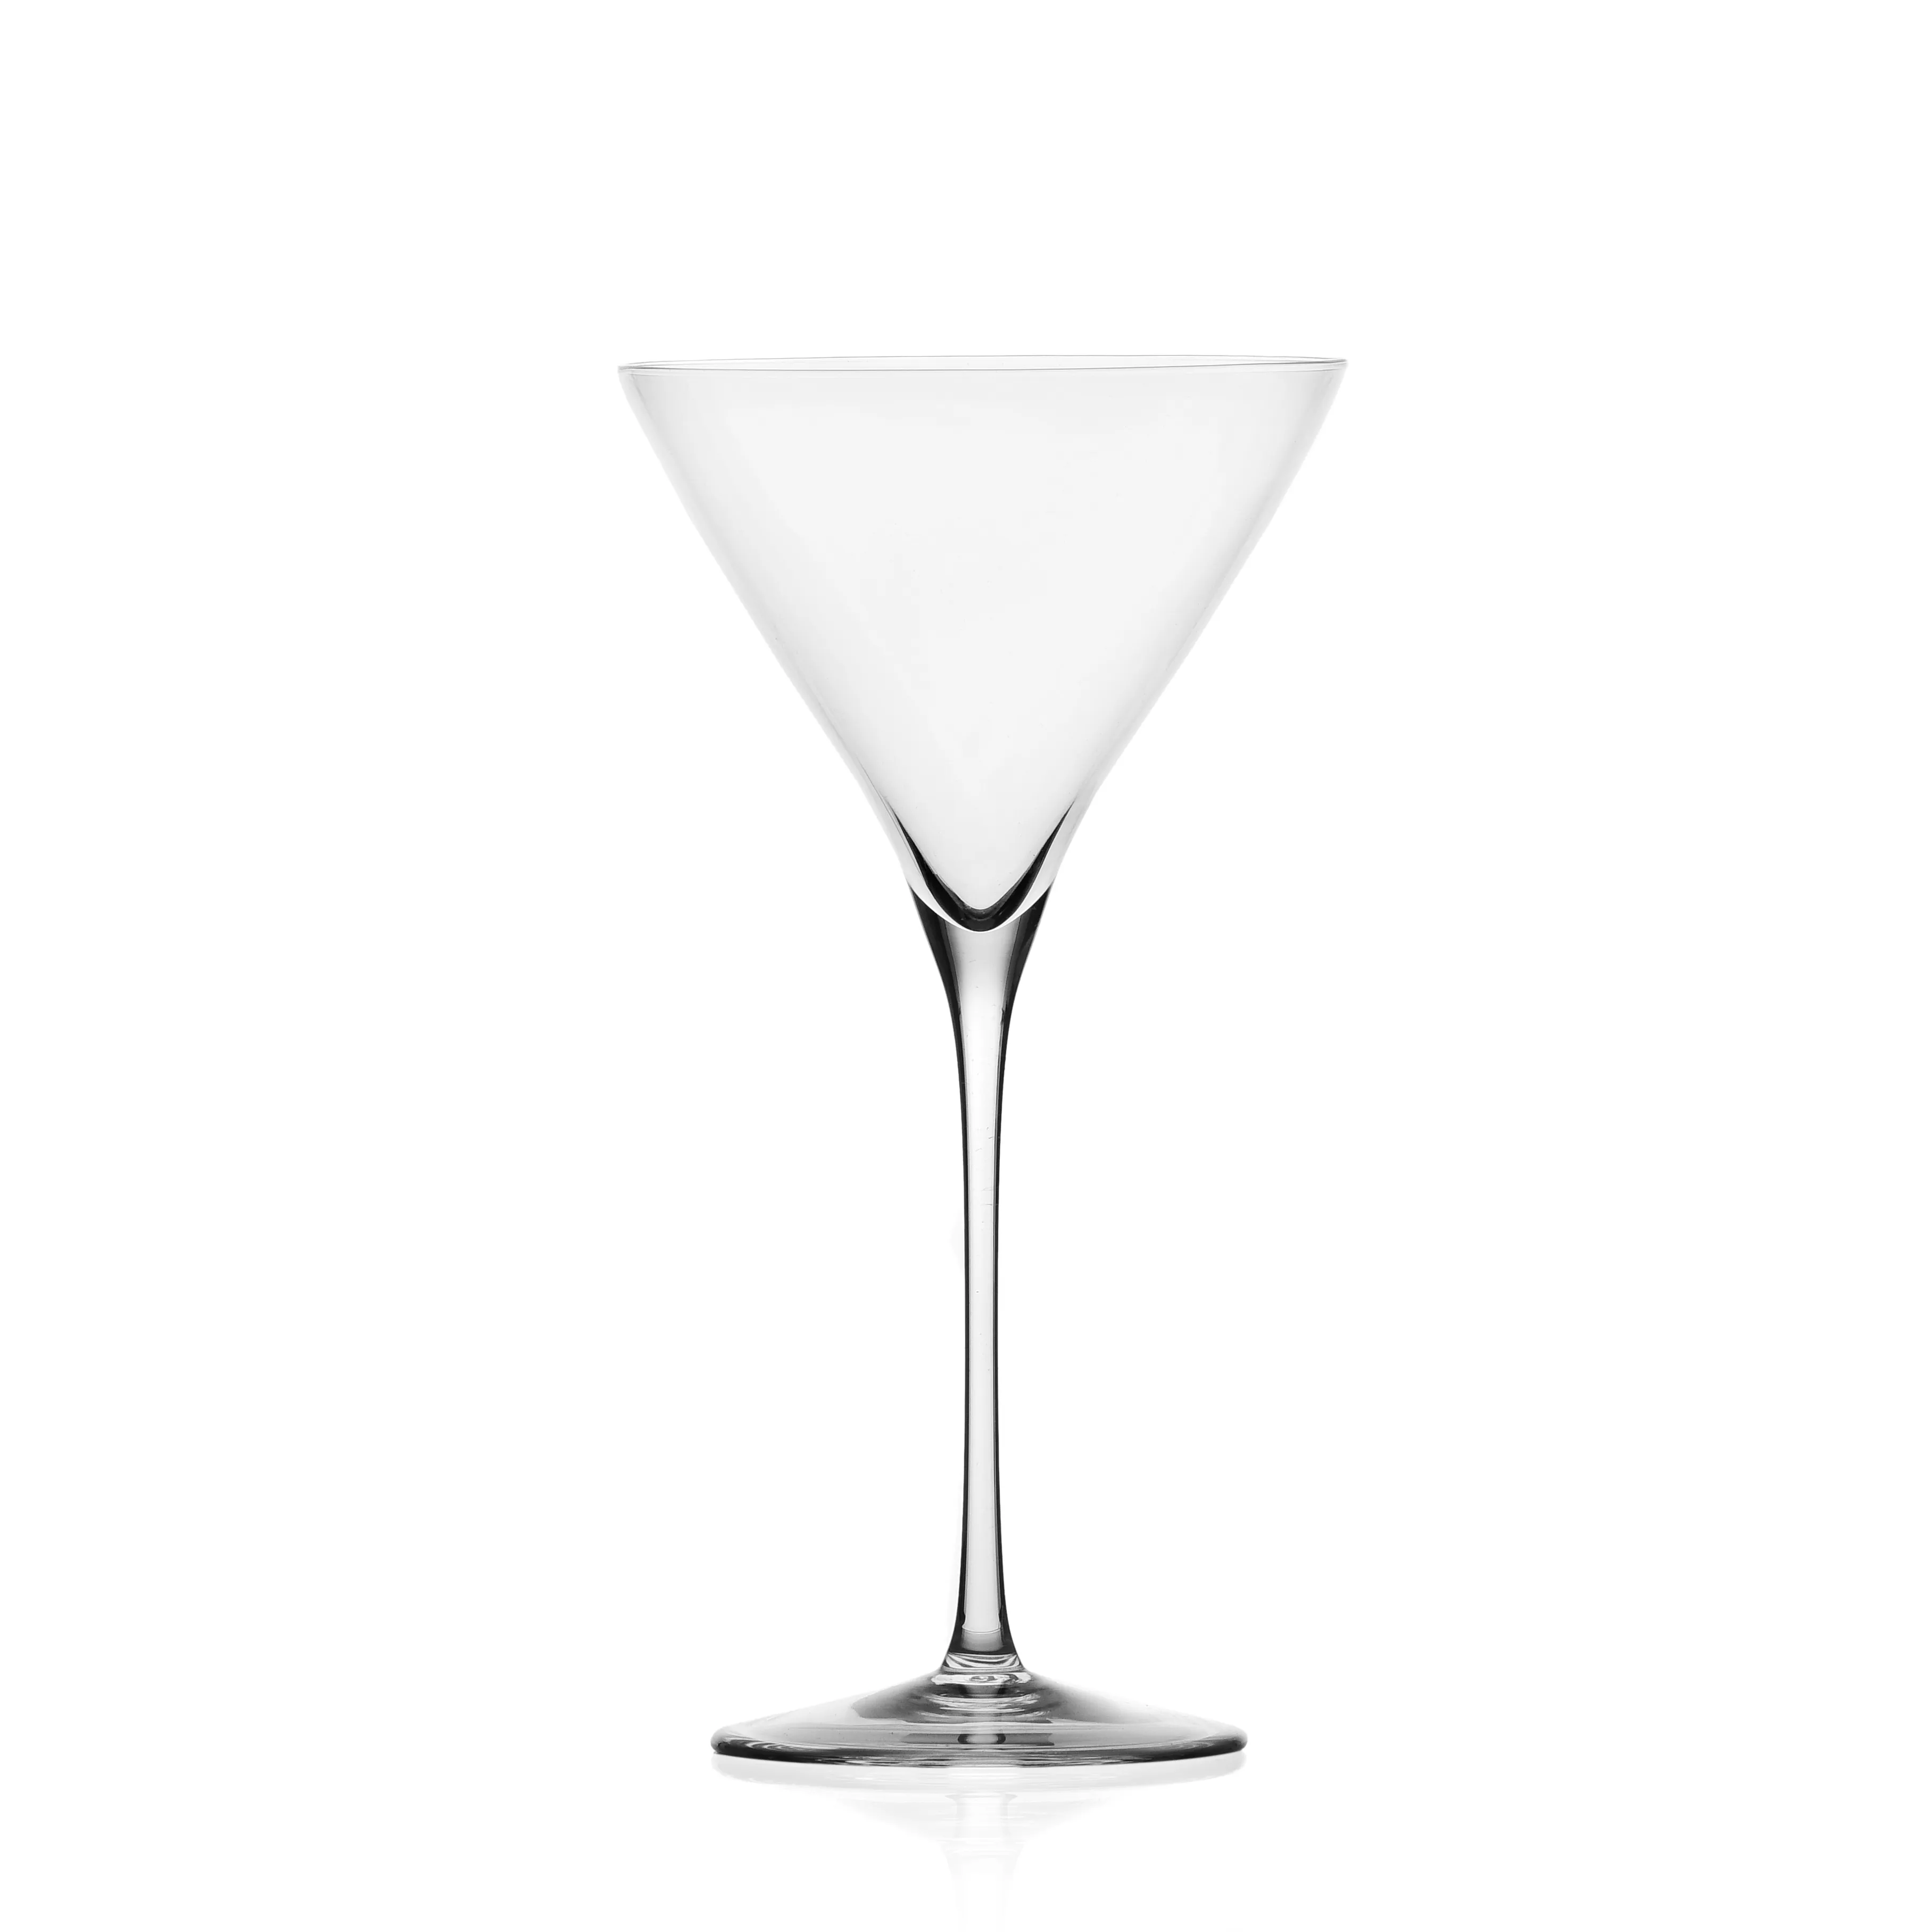 Martini glass from the Solisti collection